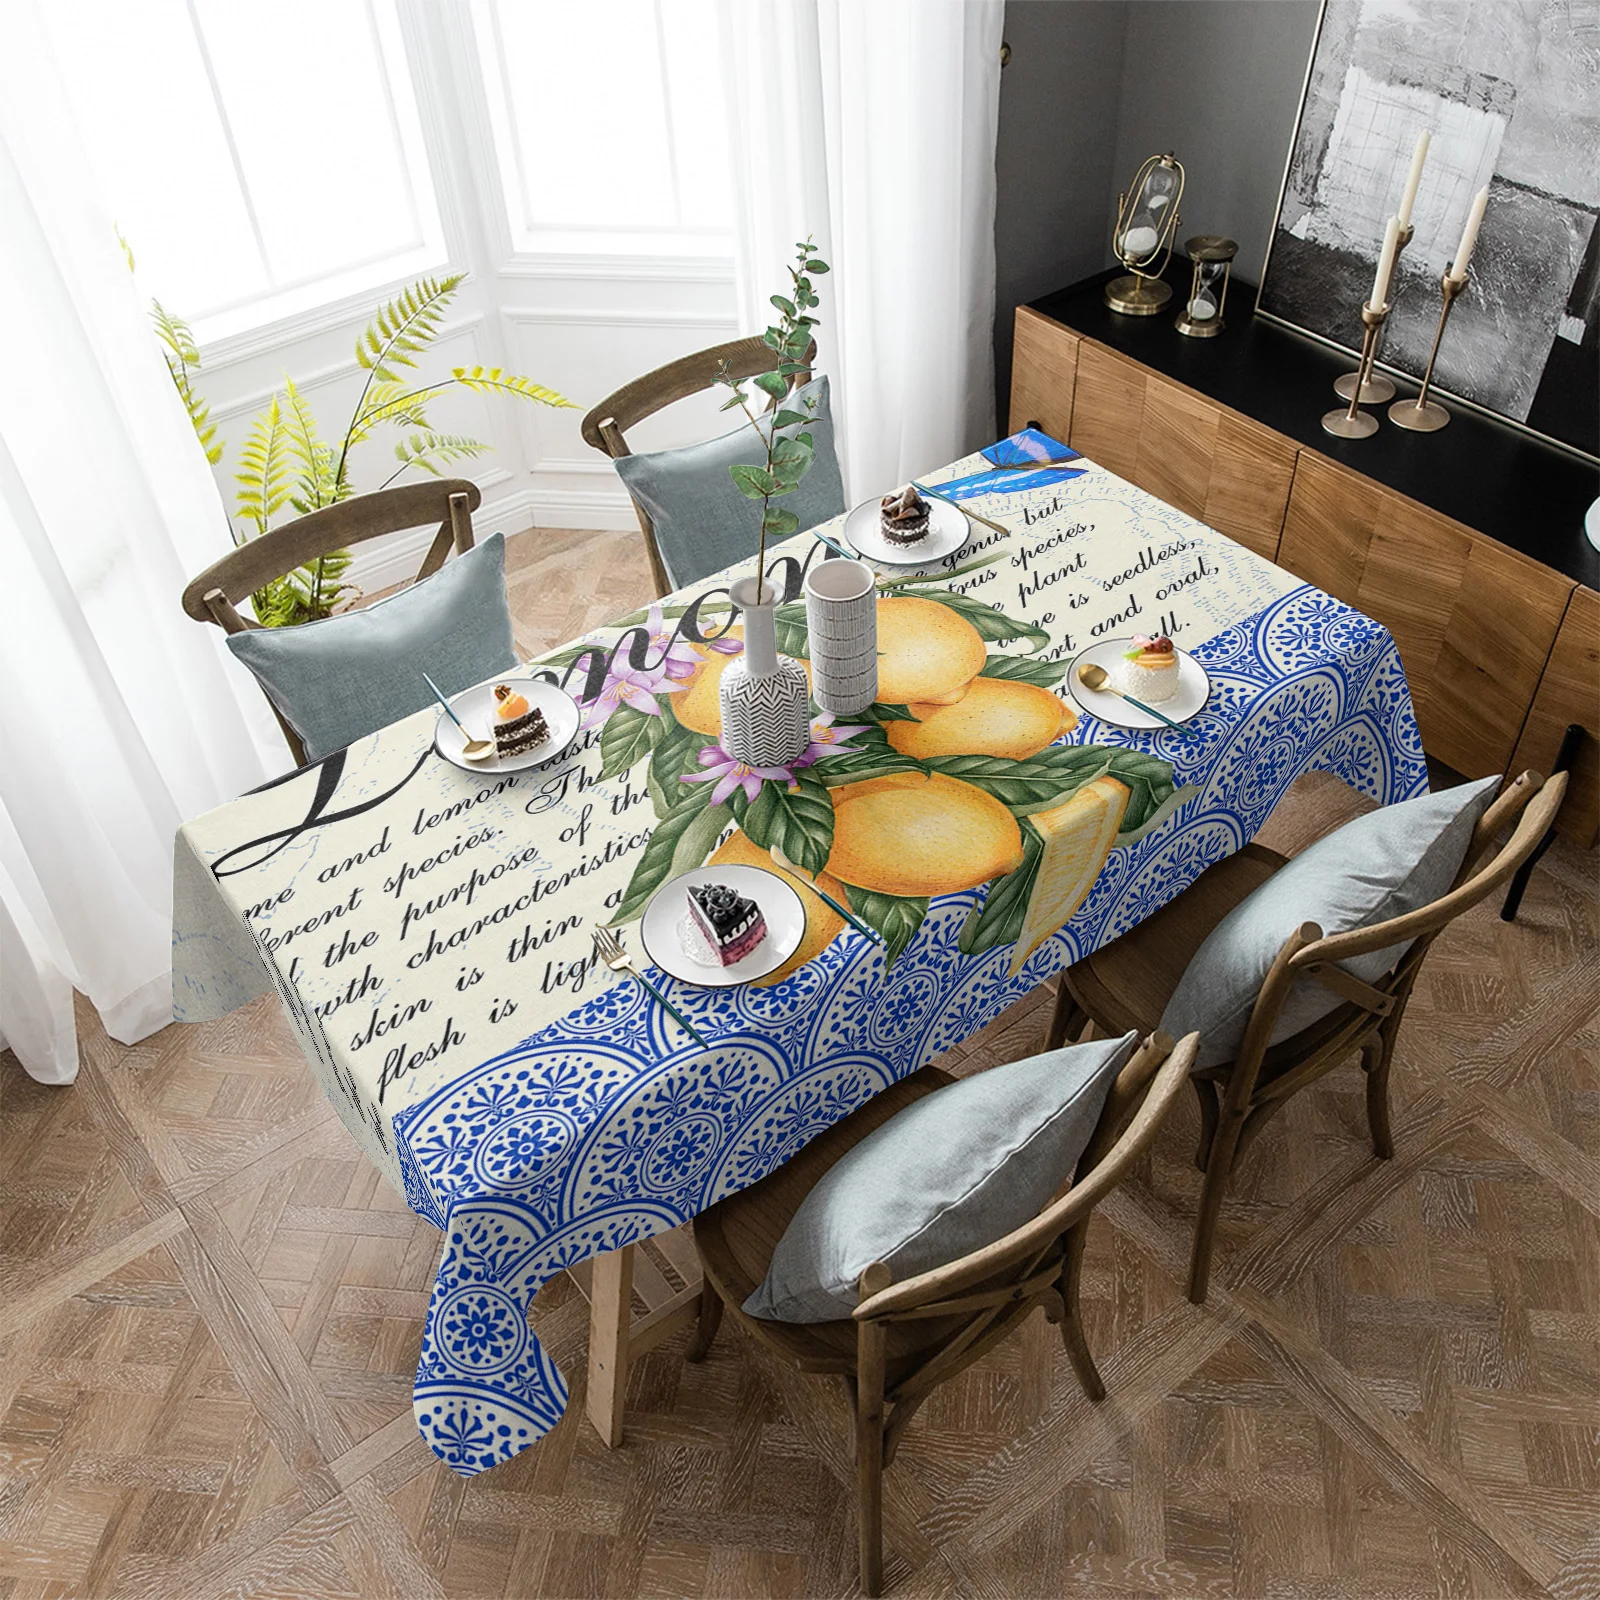 

Moroccan Pattern Retro Butterfly Lemon Tablecloths for Dining Table Waterproof Rectangular Table Cover for Kitchen Living Room